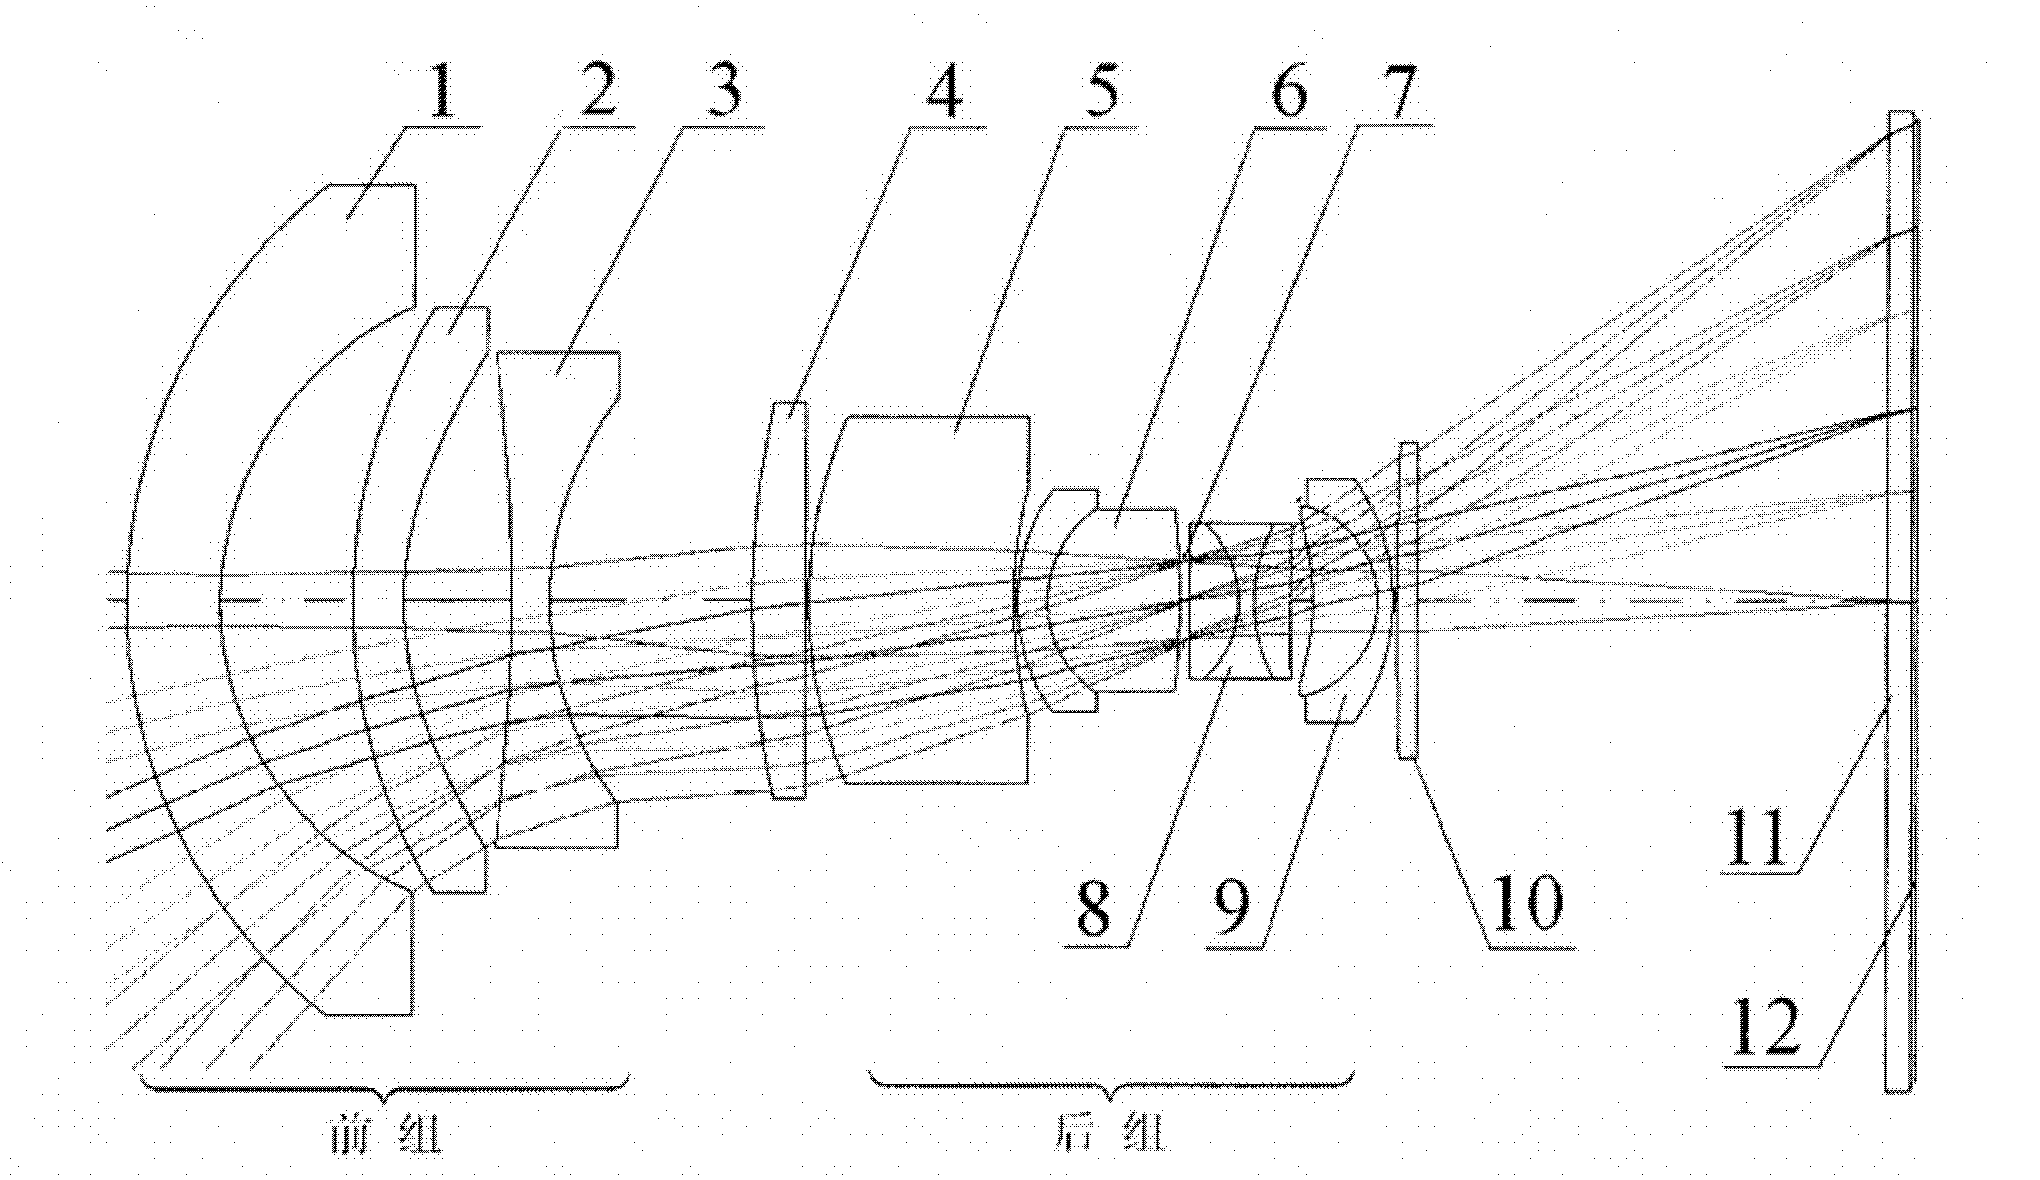 Panchromatic objective lens of aerial camera for realizing wide angle as well as long and rear operating distance